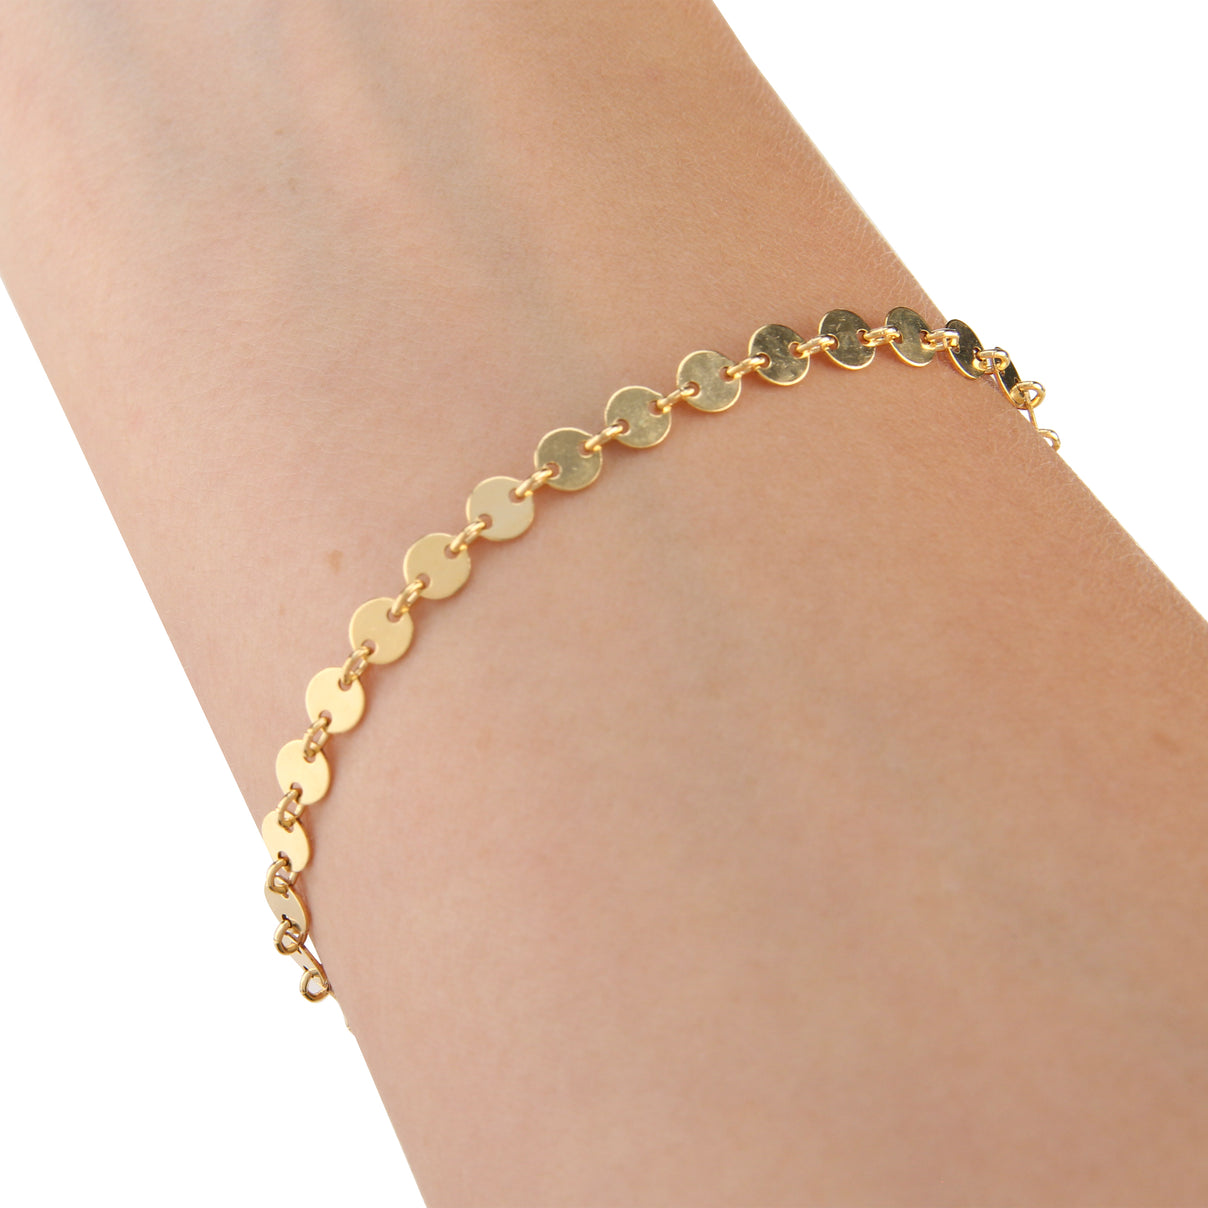 4mm round disc chain to bars in gold fill